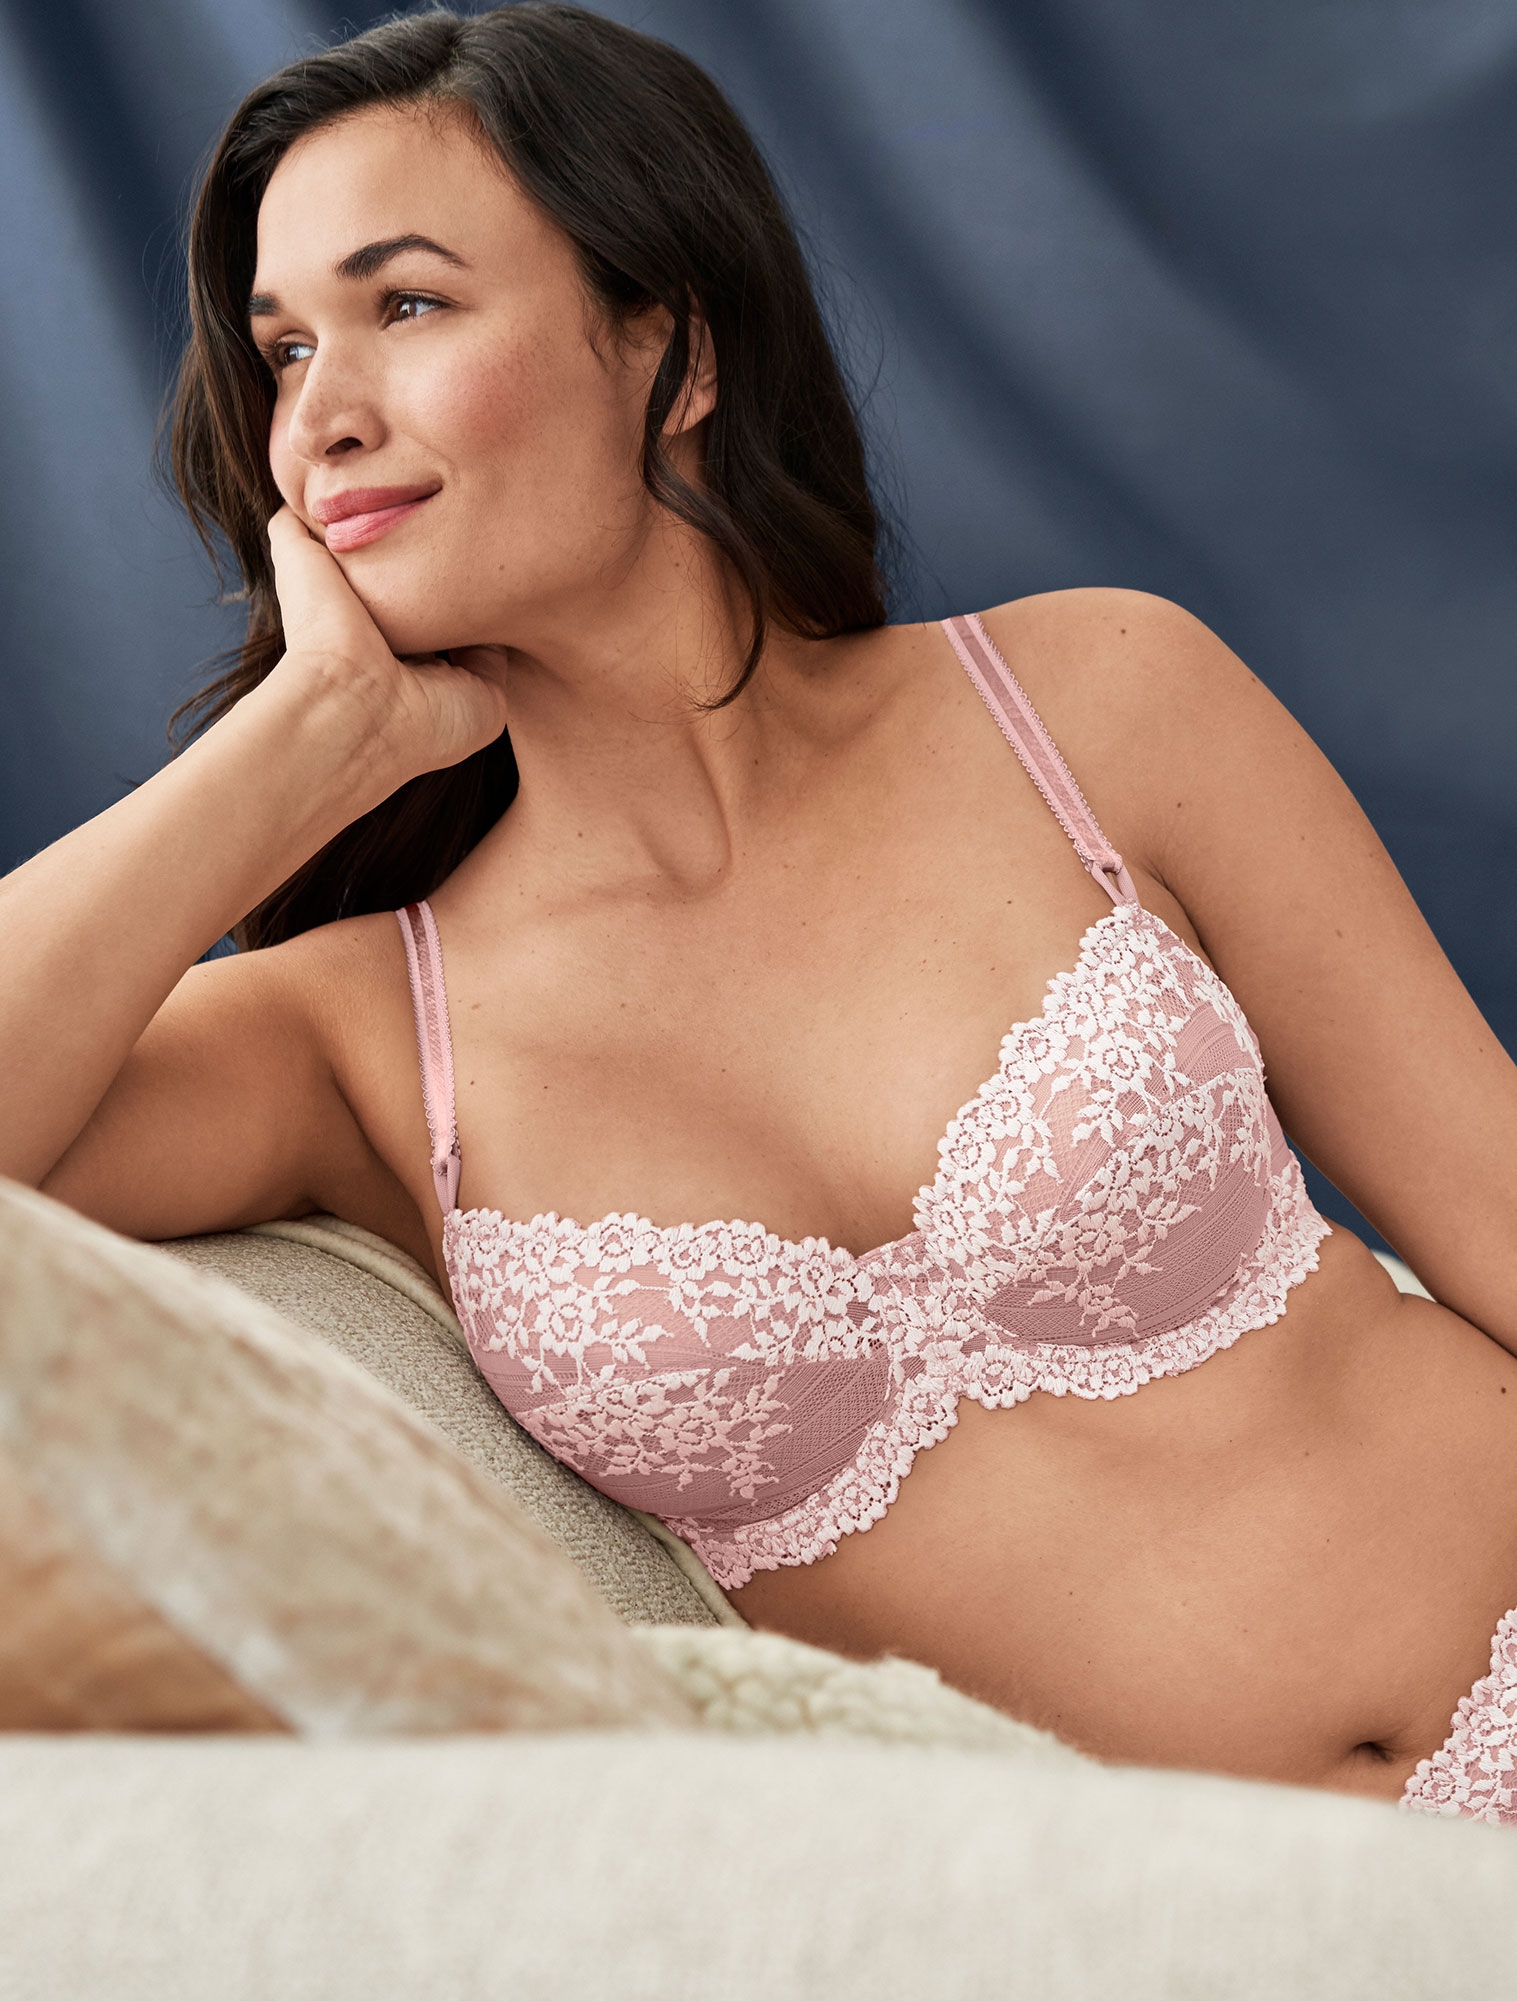 Wacoal Embrace Lace Underwire Bra 65191, Up To DDD Cup - Macy's